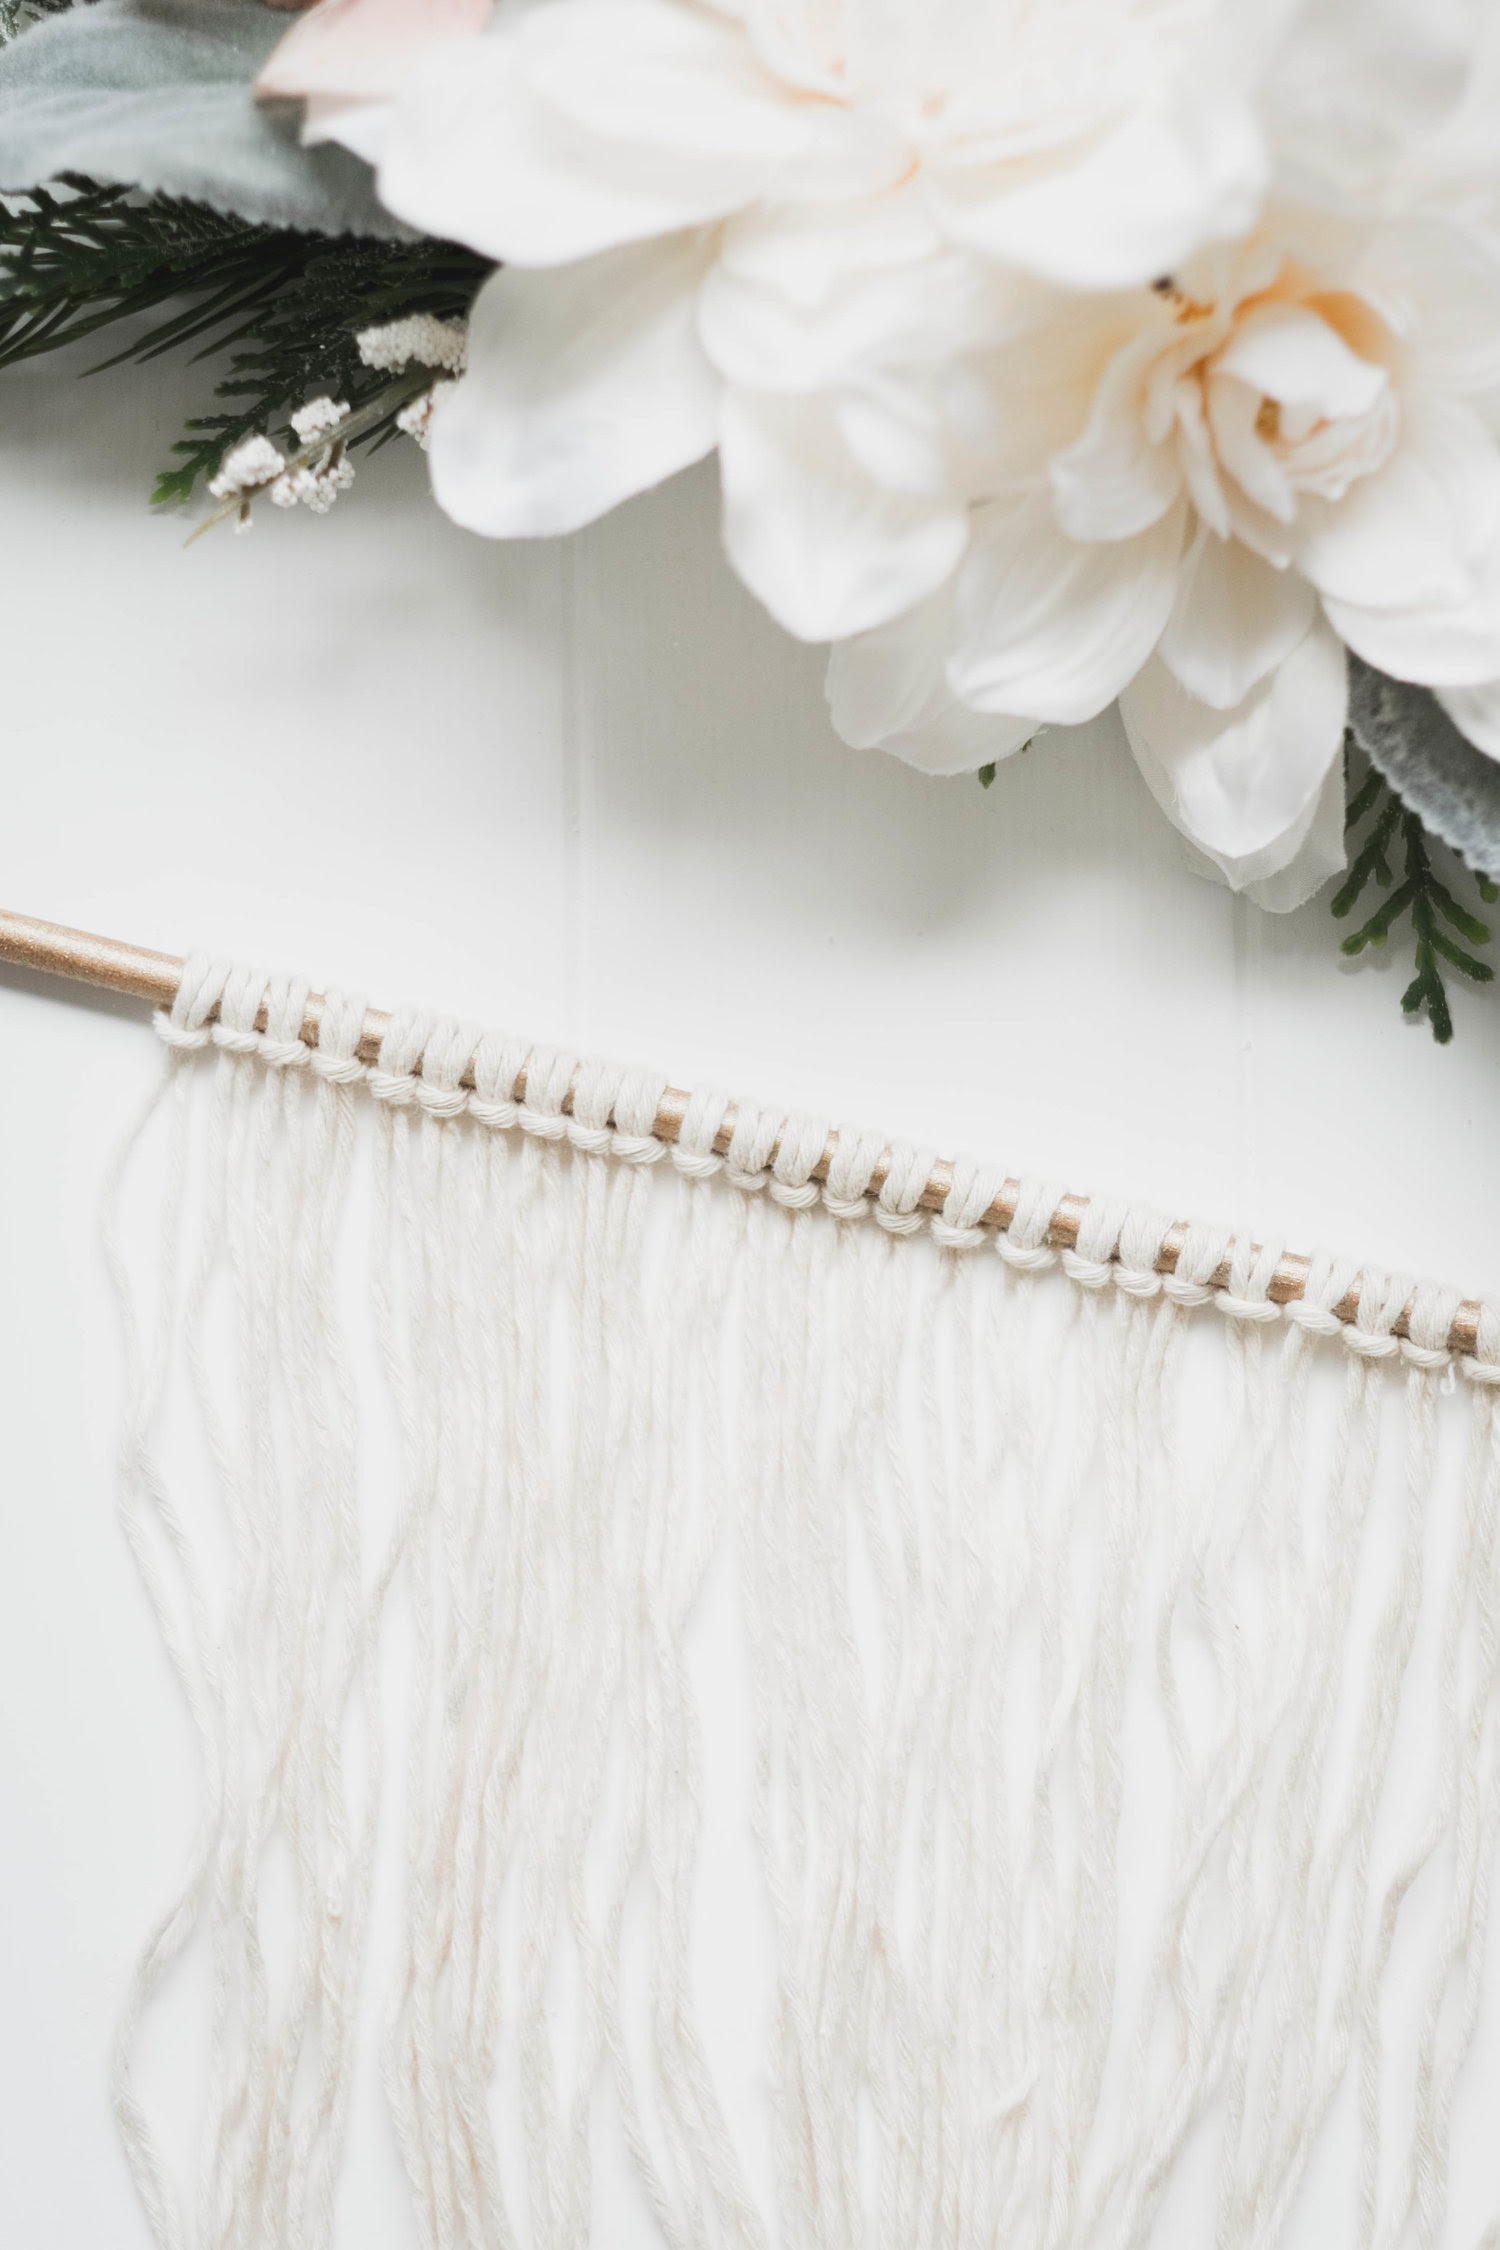 larks knot introduction to macrame